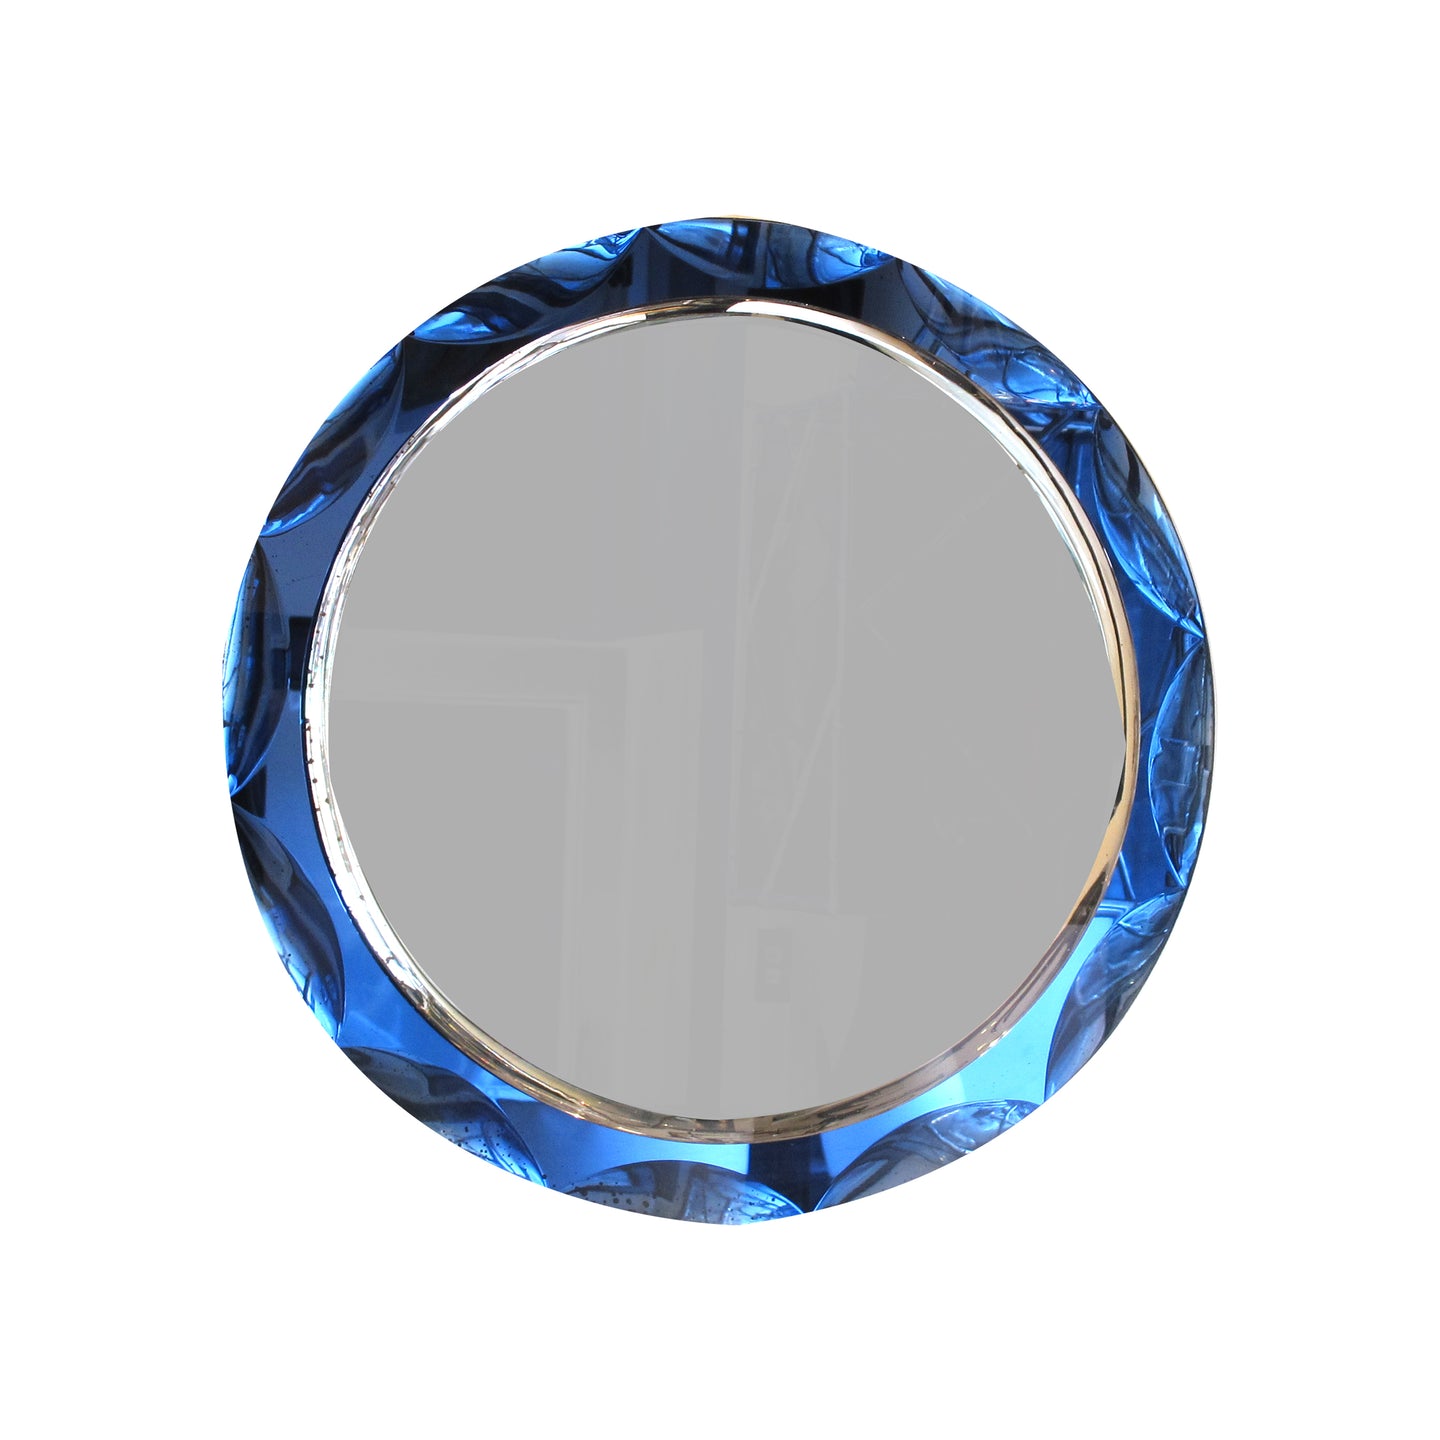 1960 Round Mirror With a Large Bevelled Deep Blue Frame, Italian